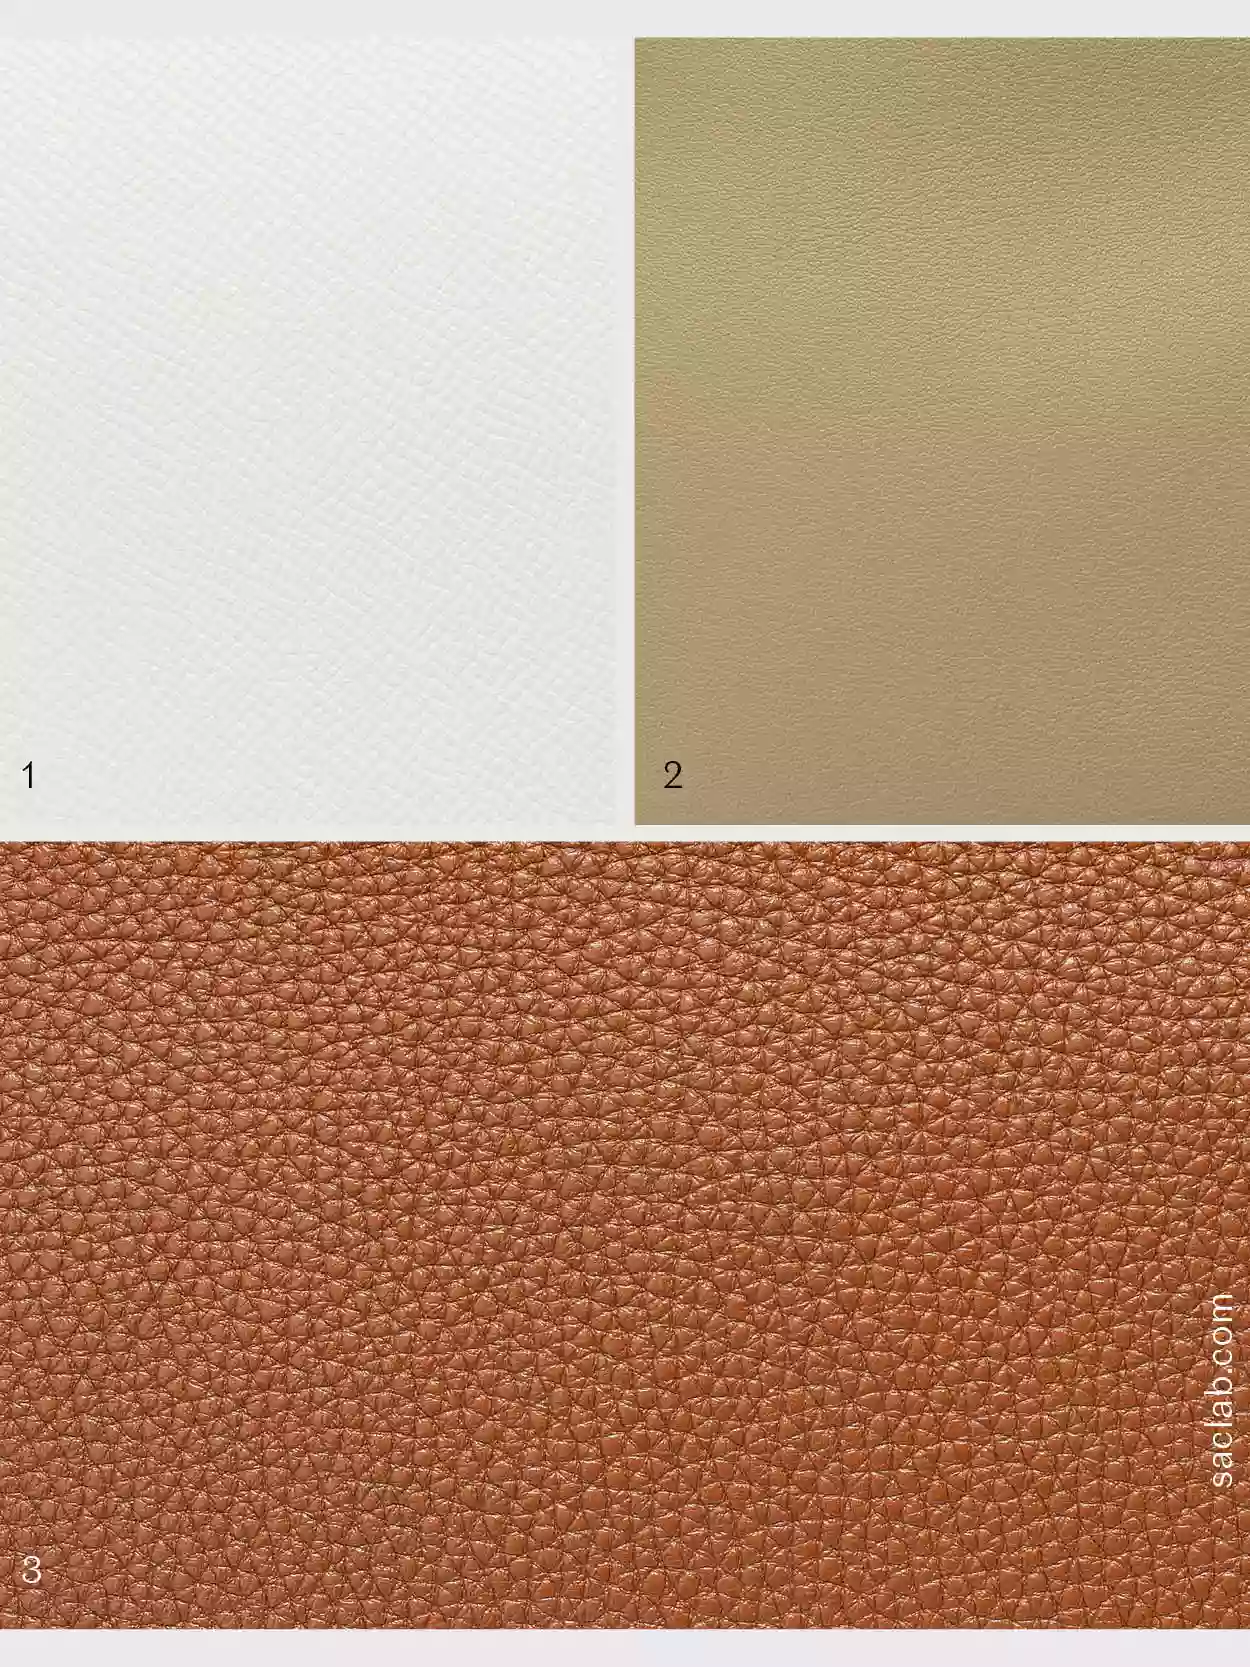 An Introduction to Hermes Smooth Leathers